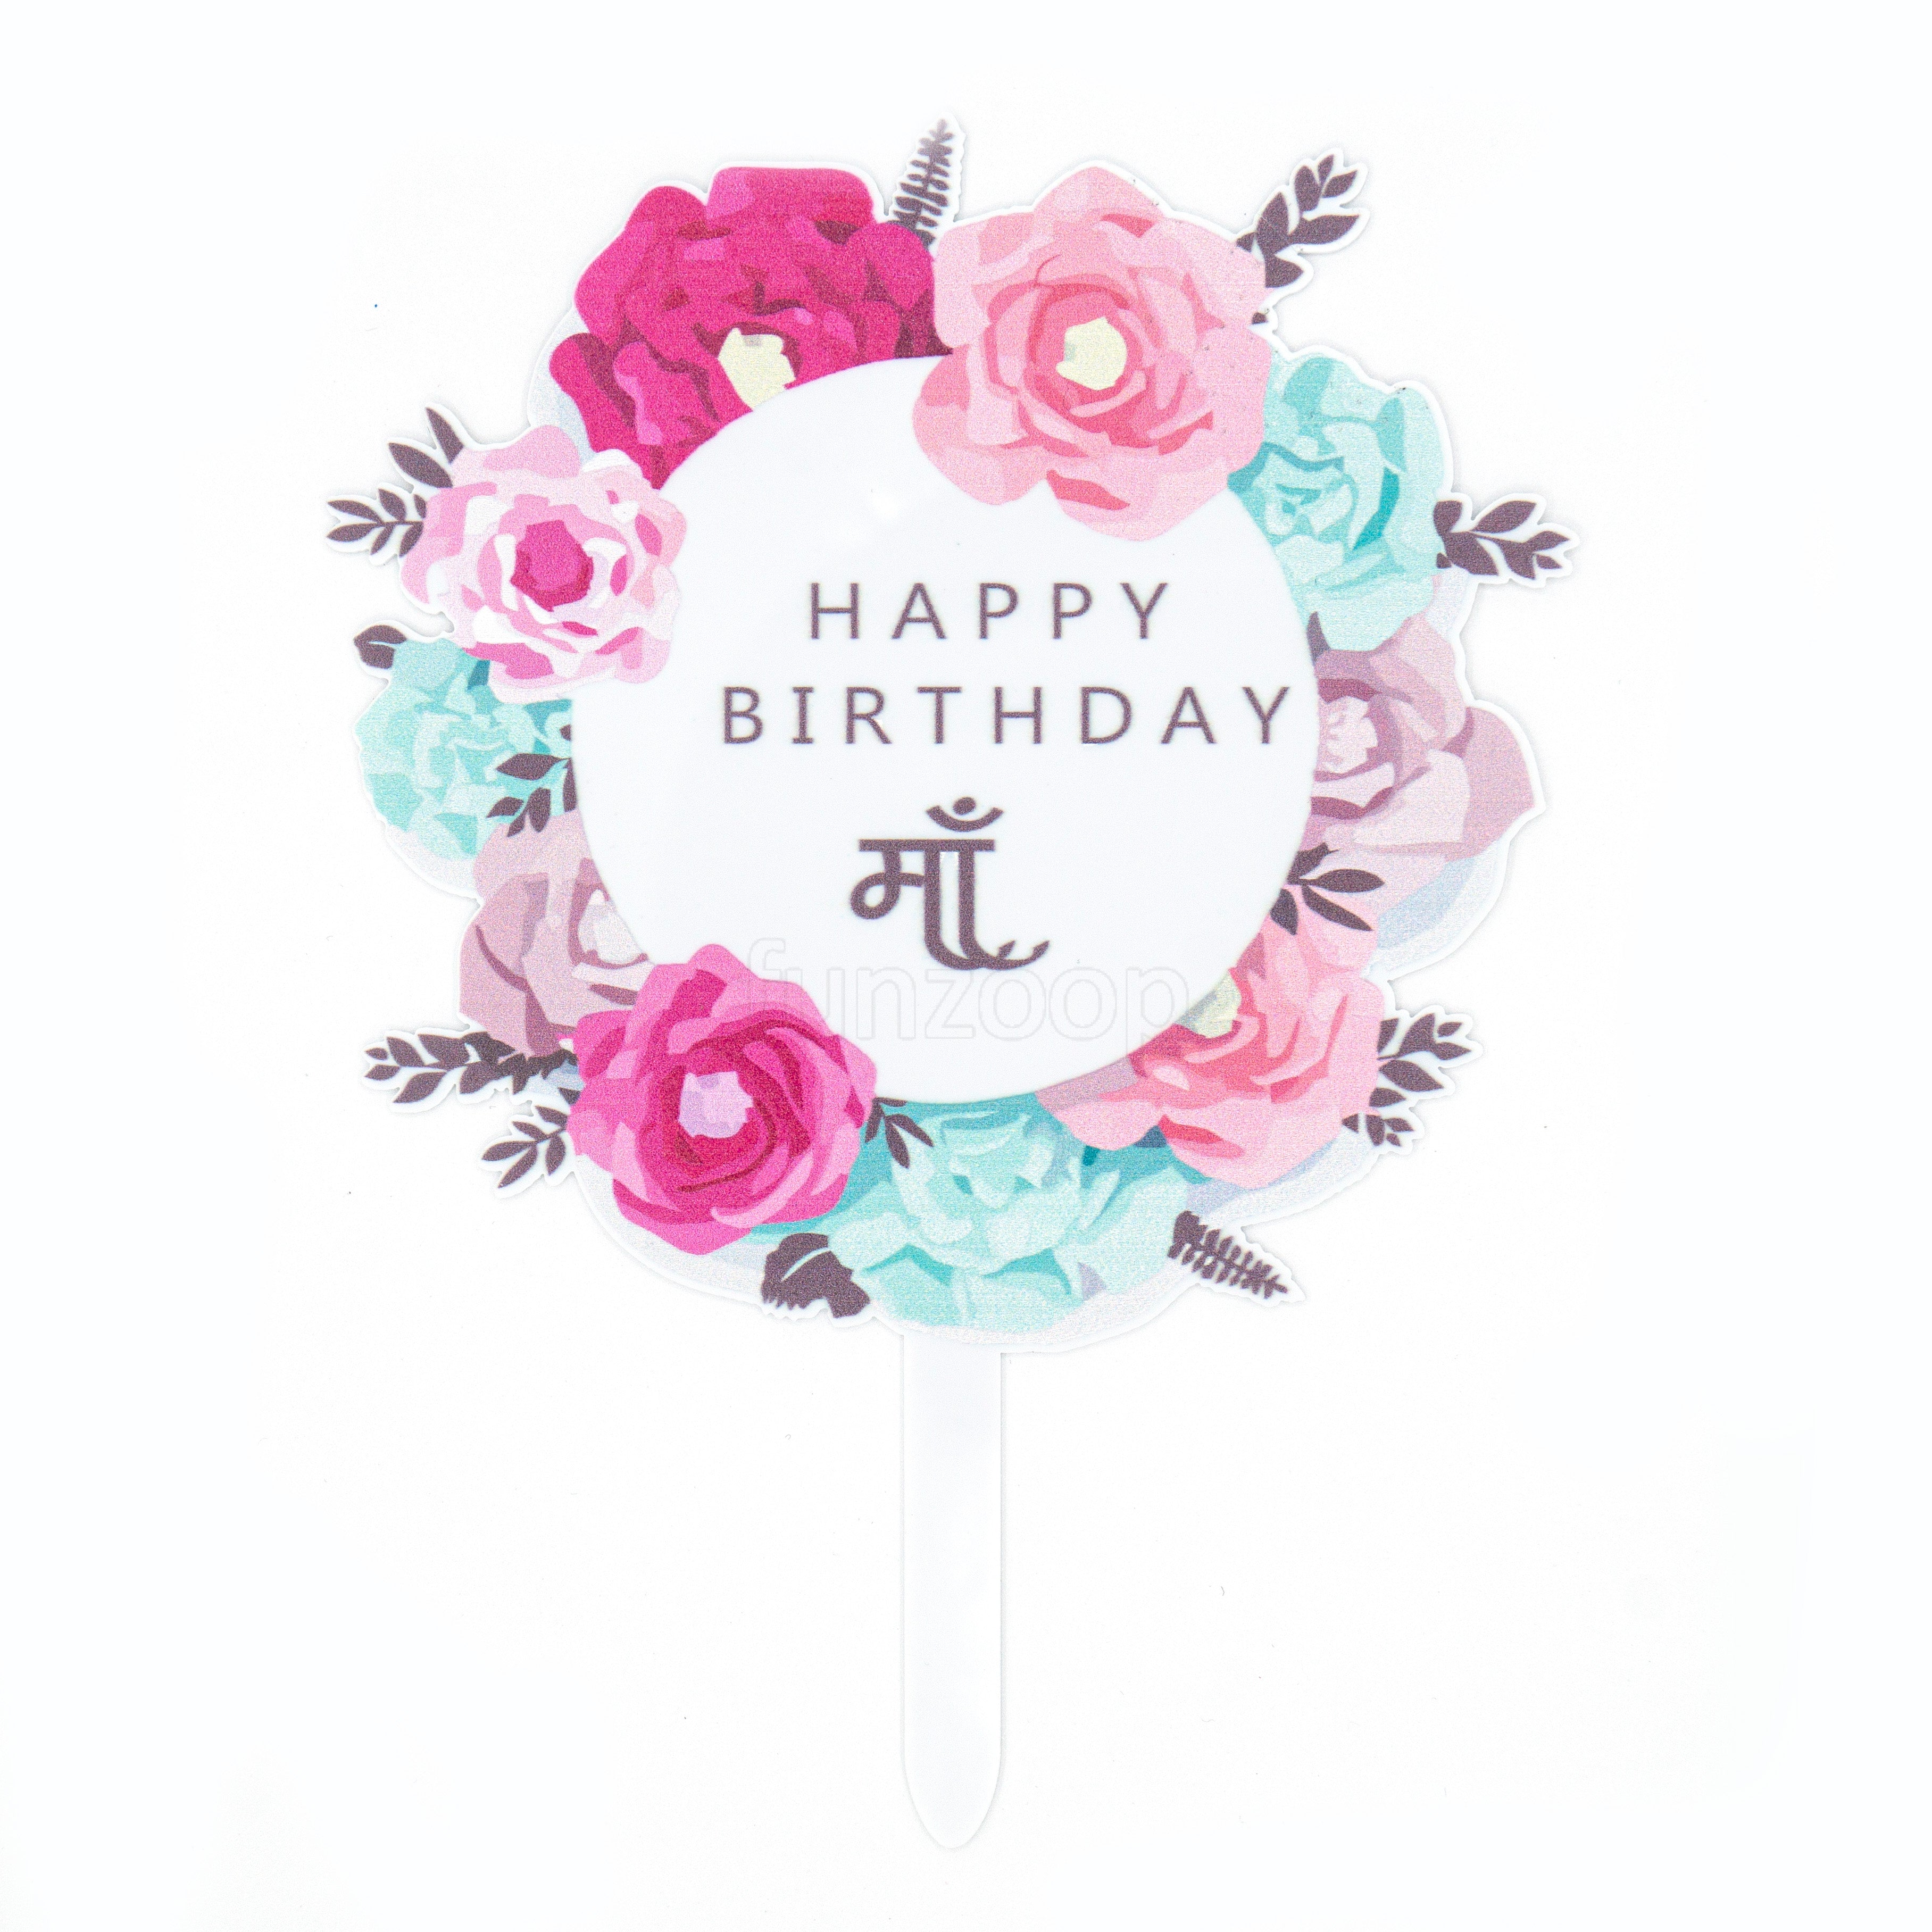 Premium PSD | Happy birthday greeting card template. cake and balloons. 3d  render